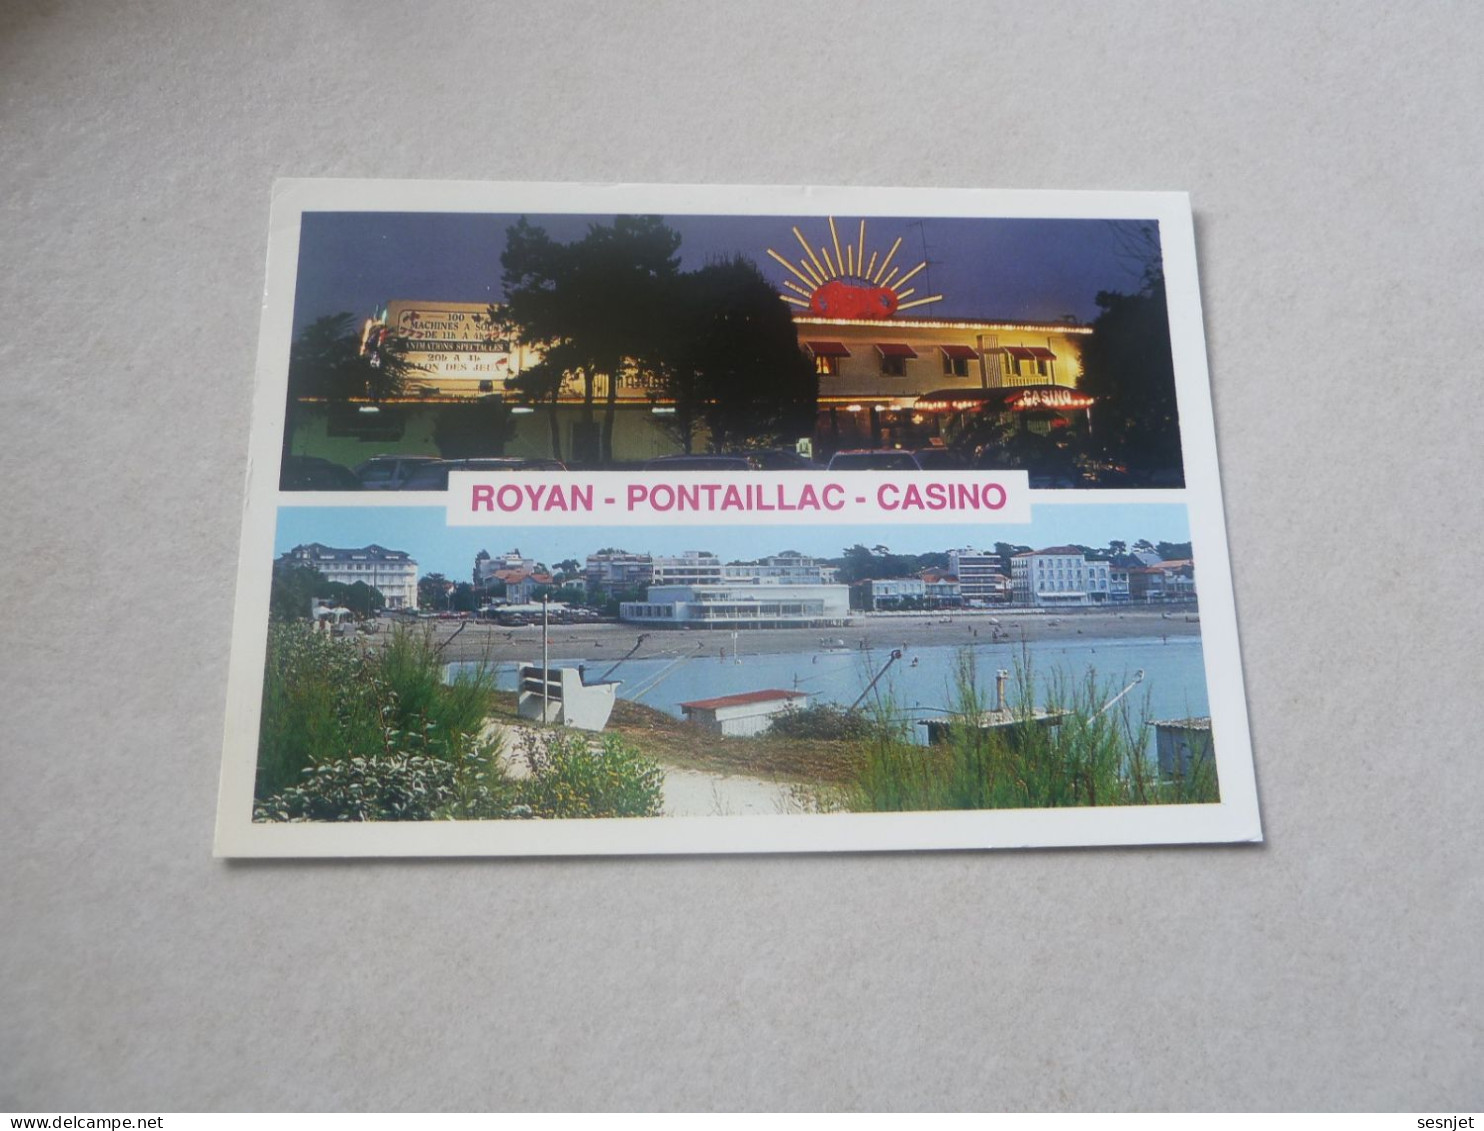 Royan - Pontaillac - Multi-vues - Yt 2820 - Editions Marcou - Année 1993 - - Casino'